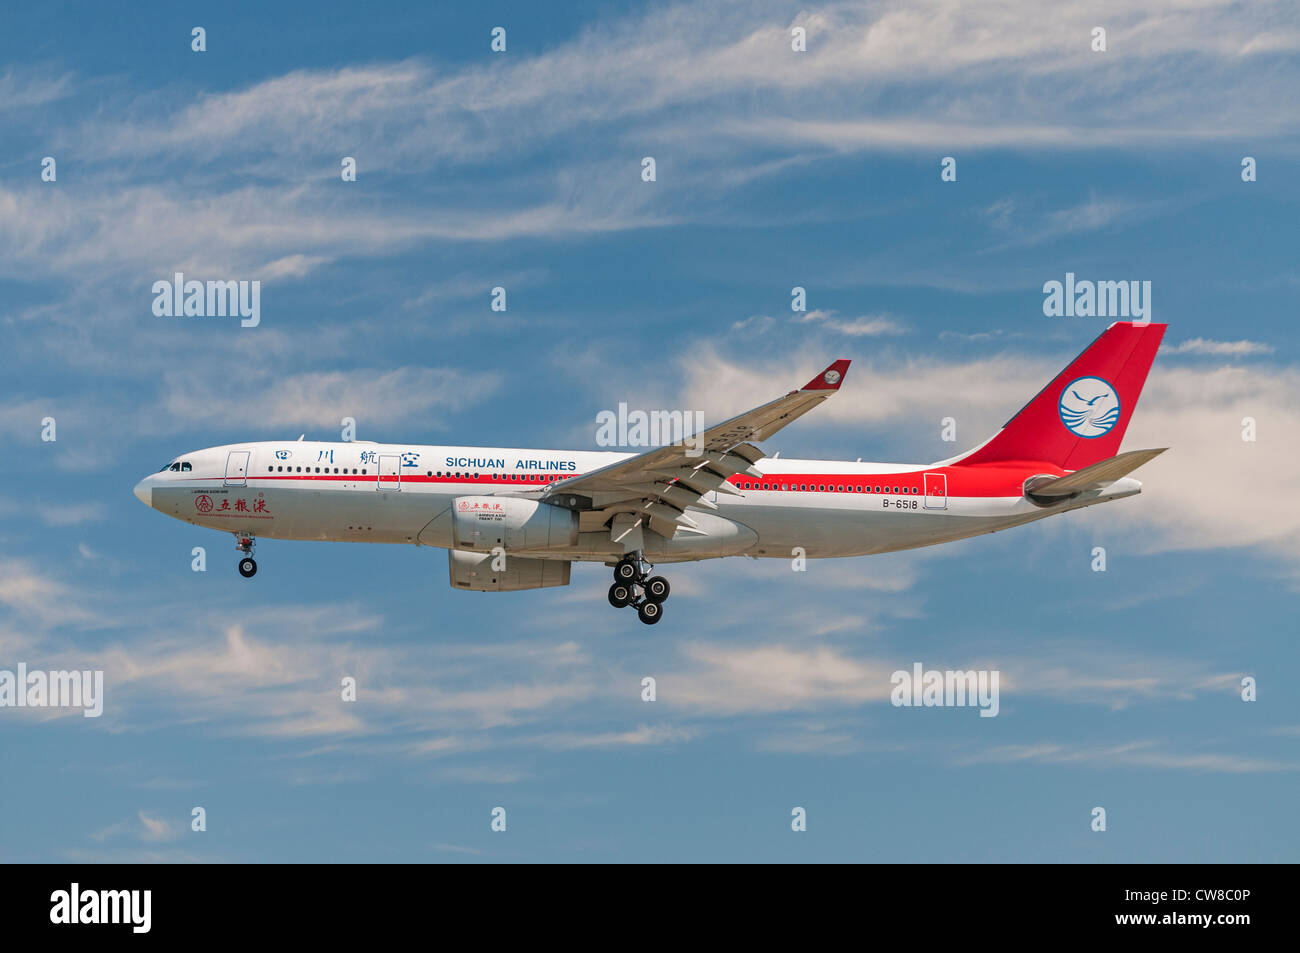 Sichuan Airlines plane Airbus A330-200 jetliner on final approach for landing Stock Photo